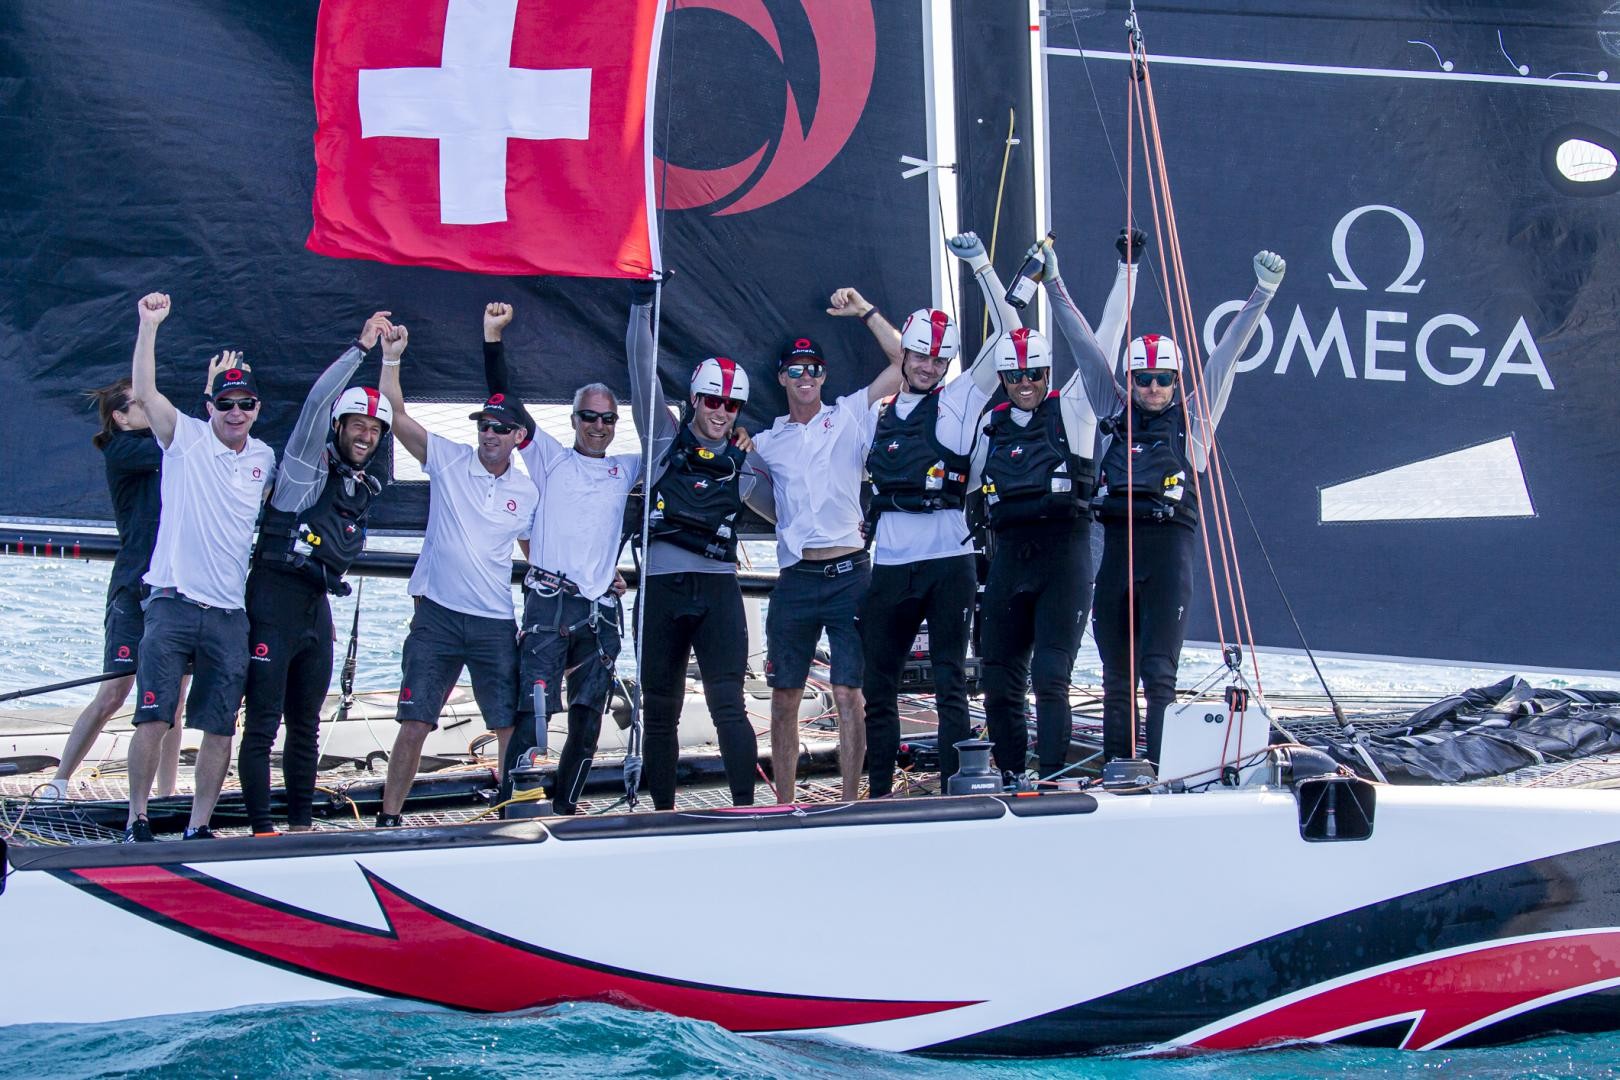 Alinghi – GC32 World Champion with two races to spare